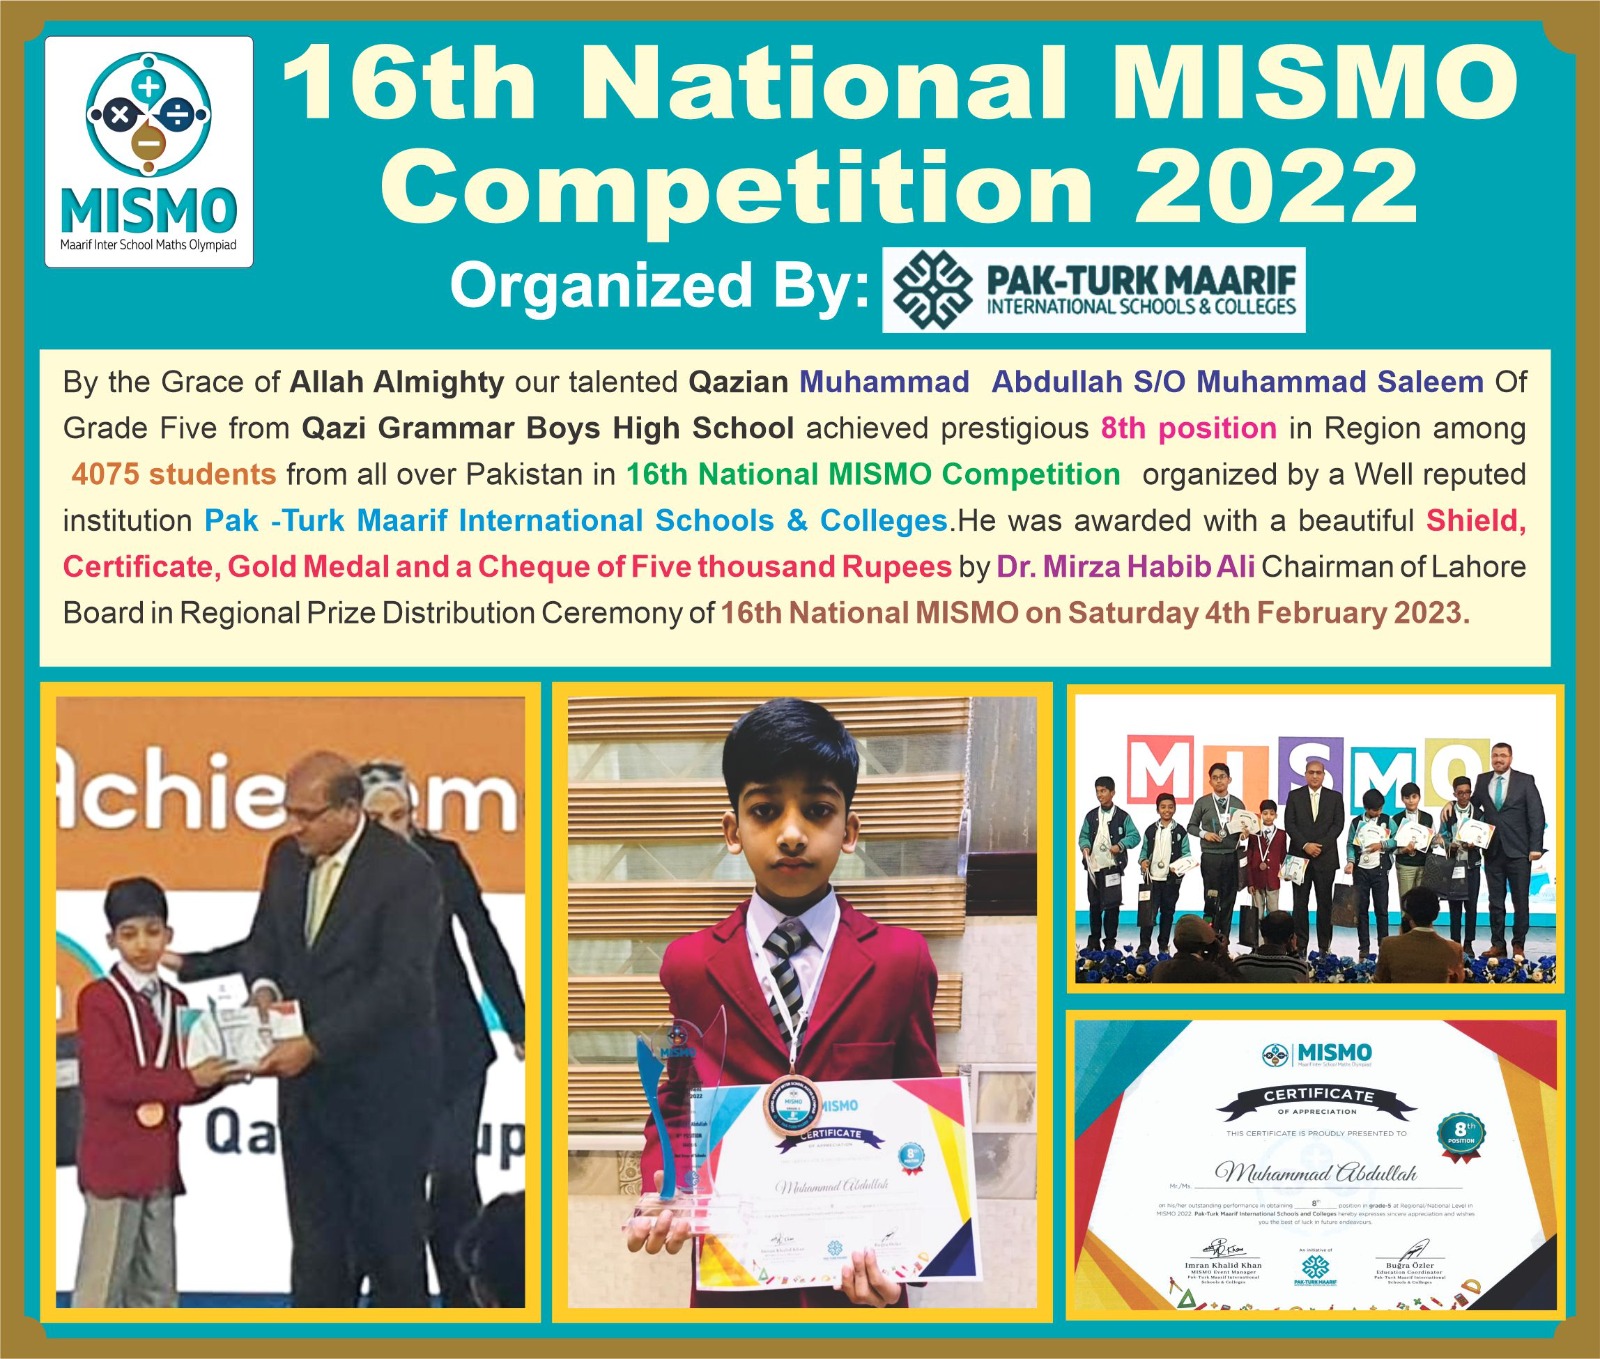 16th National MISMO Competition 2022